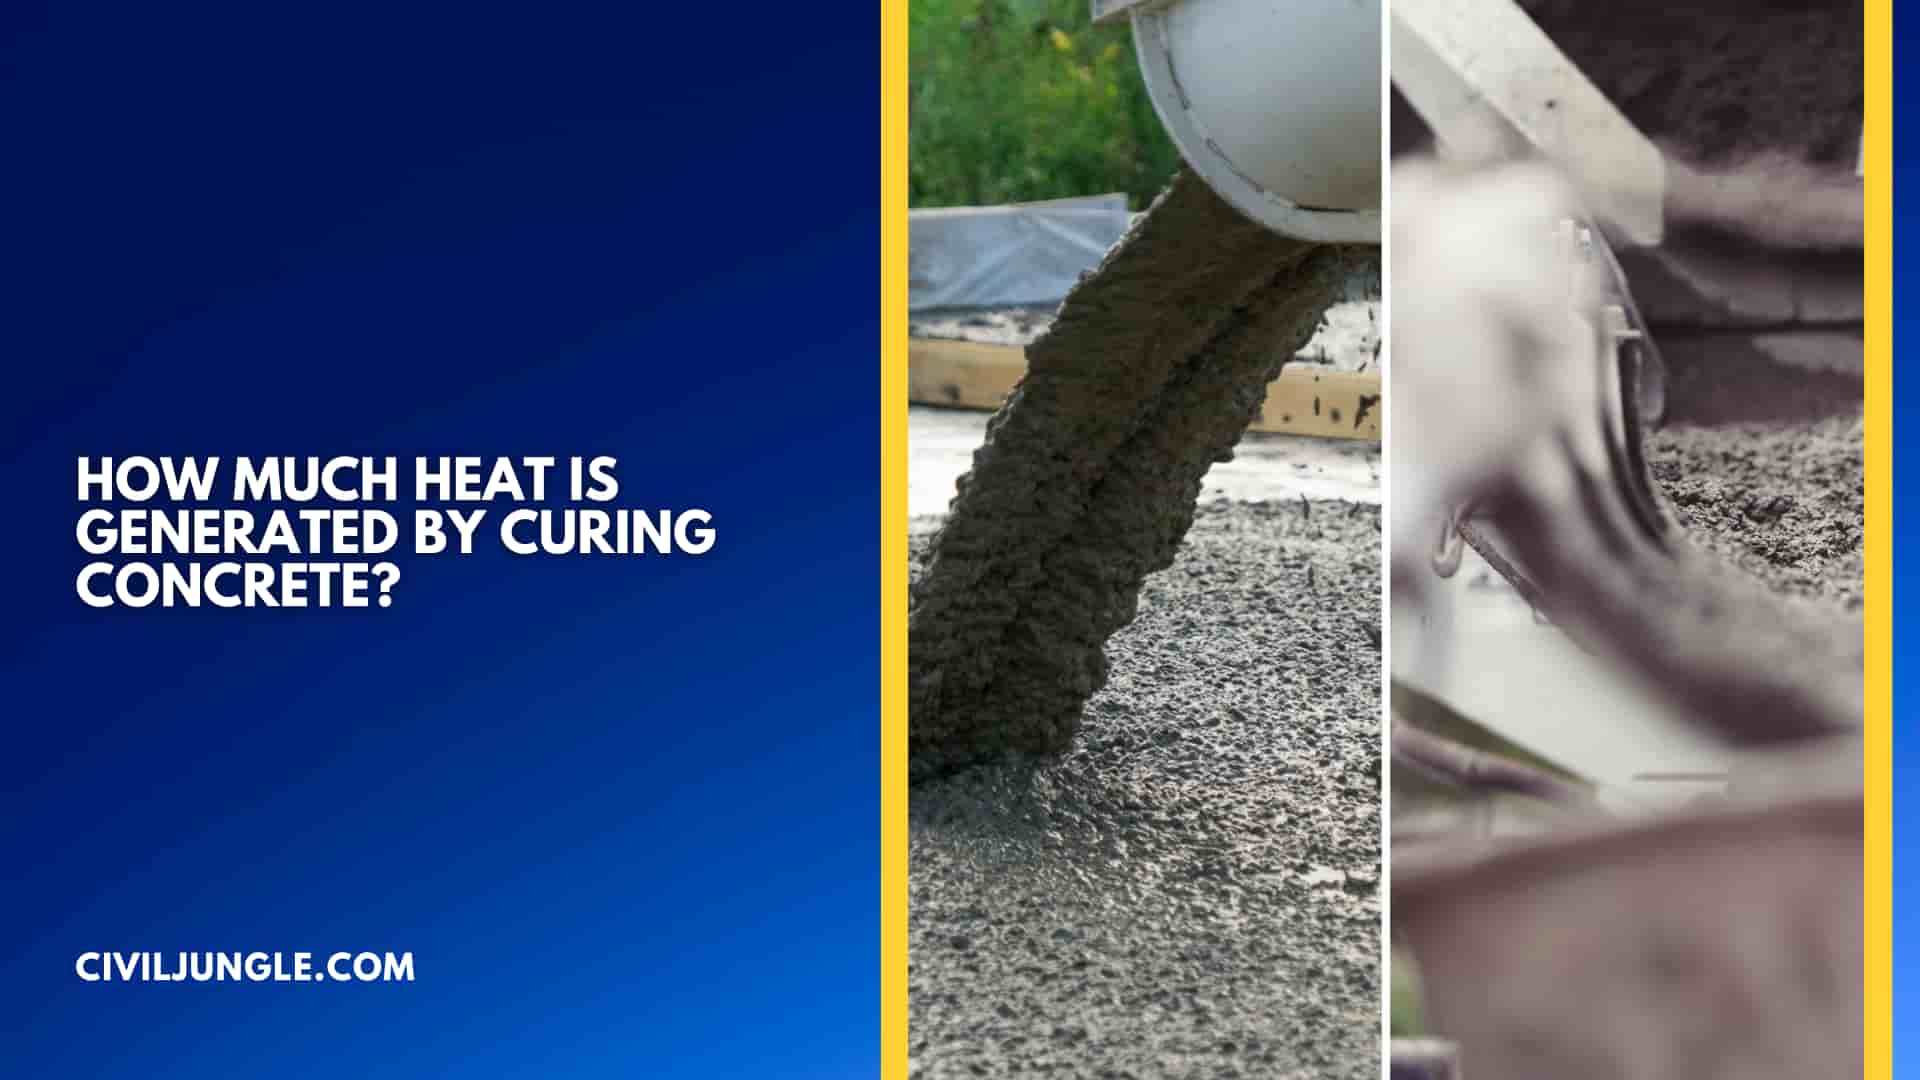 How Much Heat Is Generated by Curing Concrete?